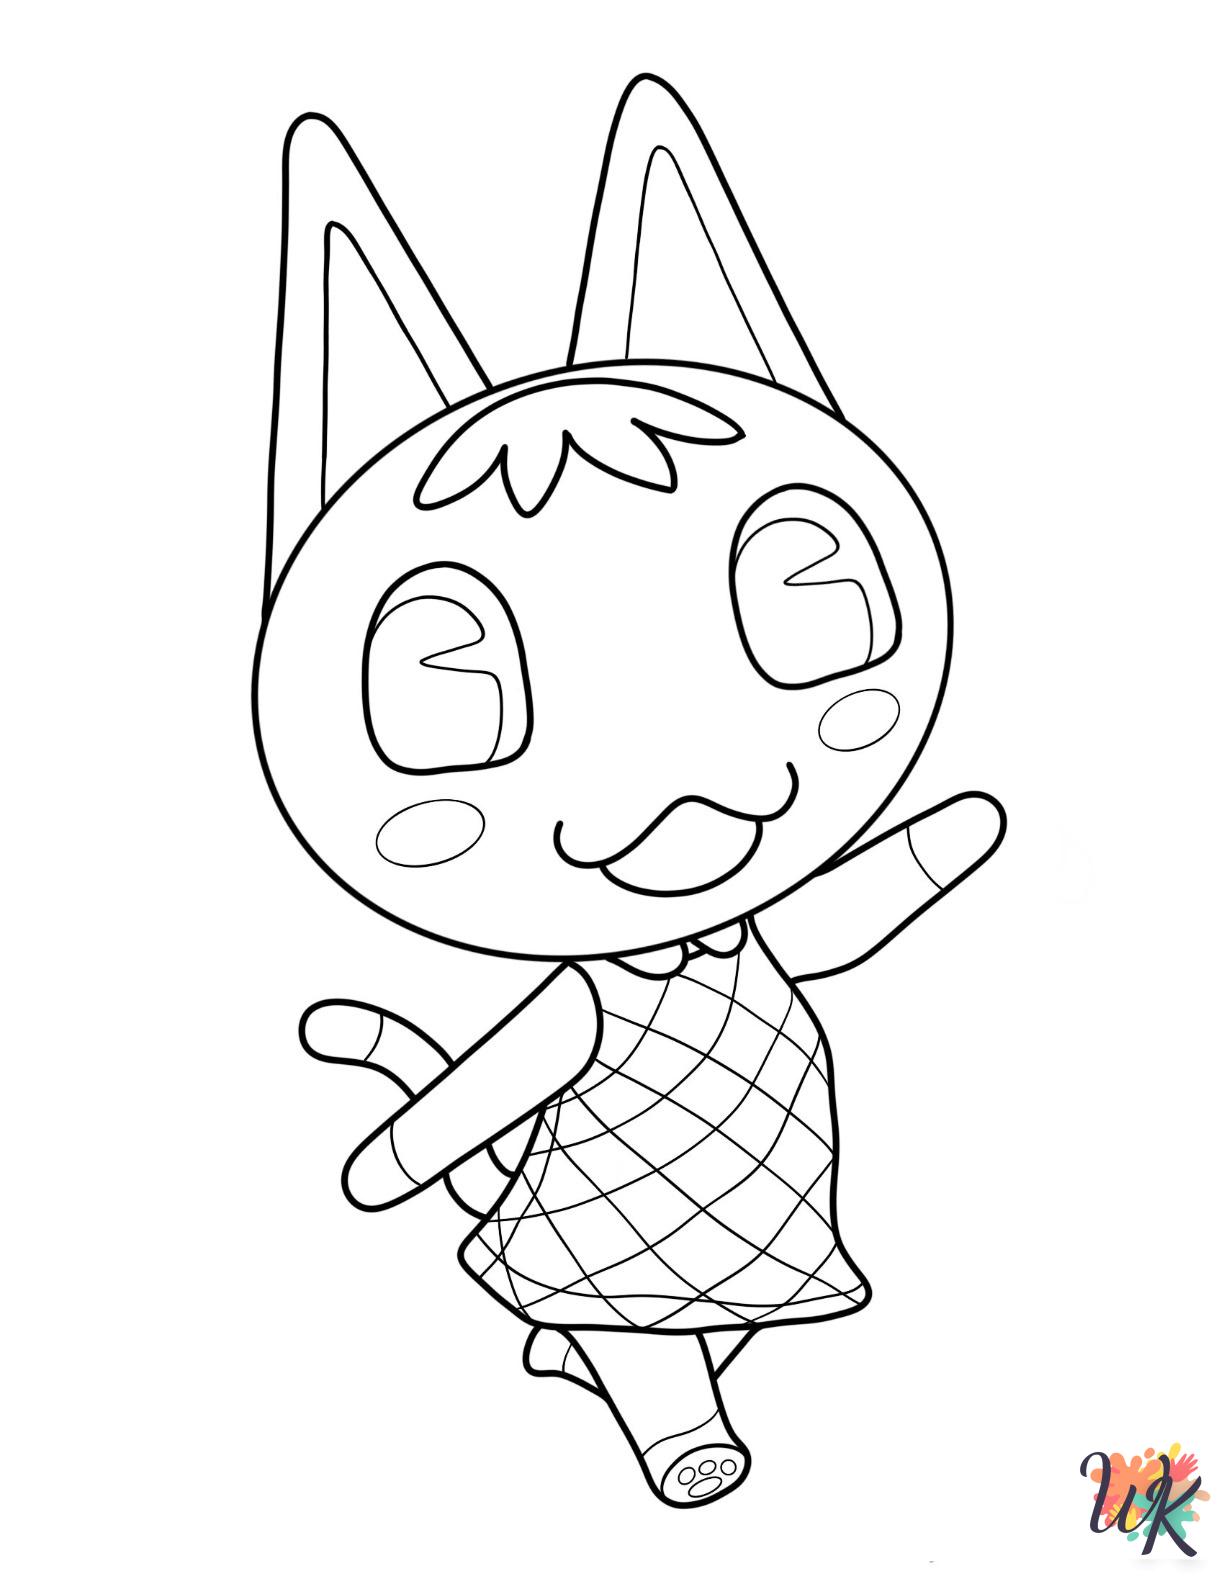 Animal Crossing adult coloring pages